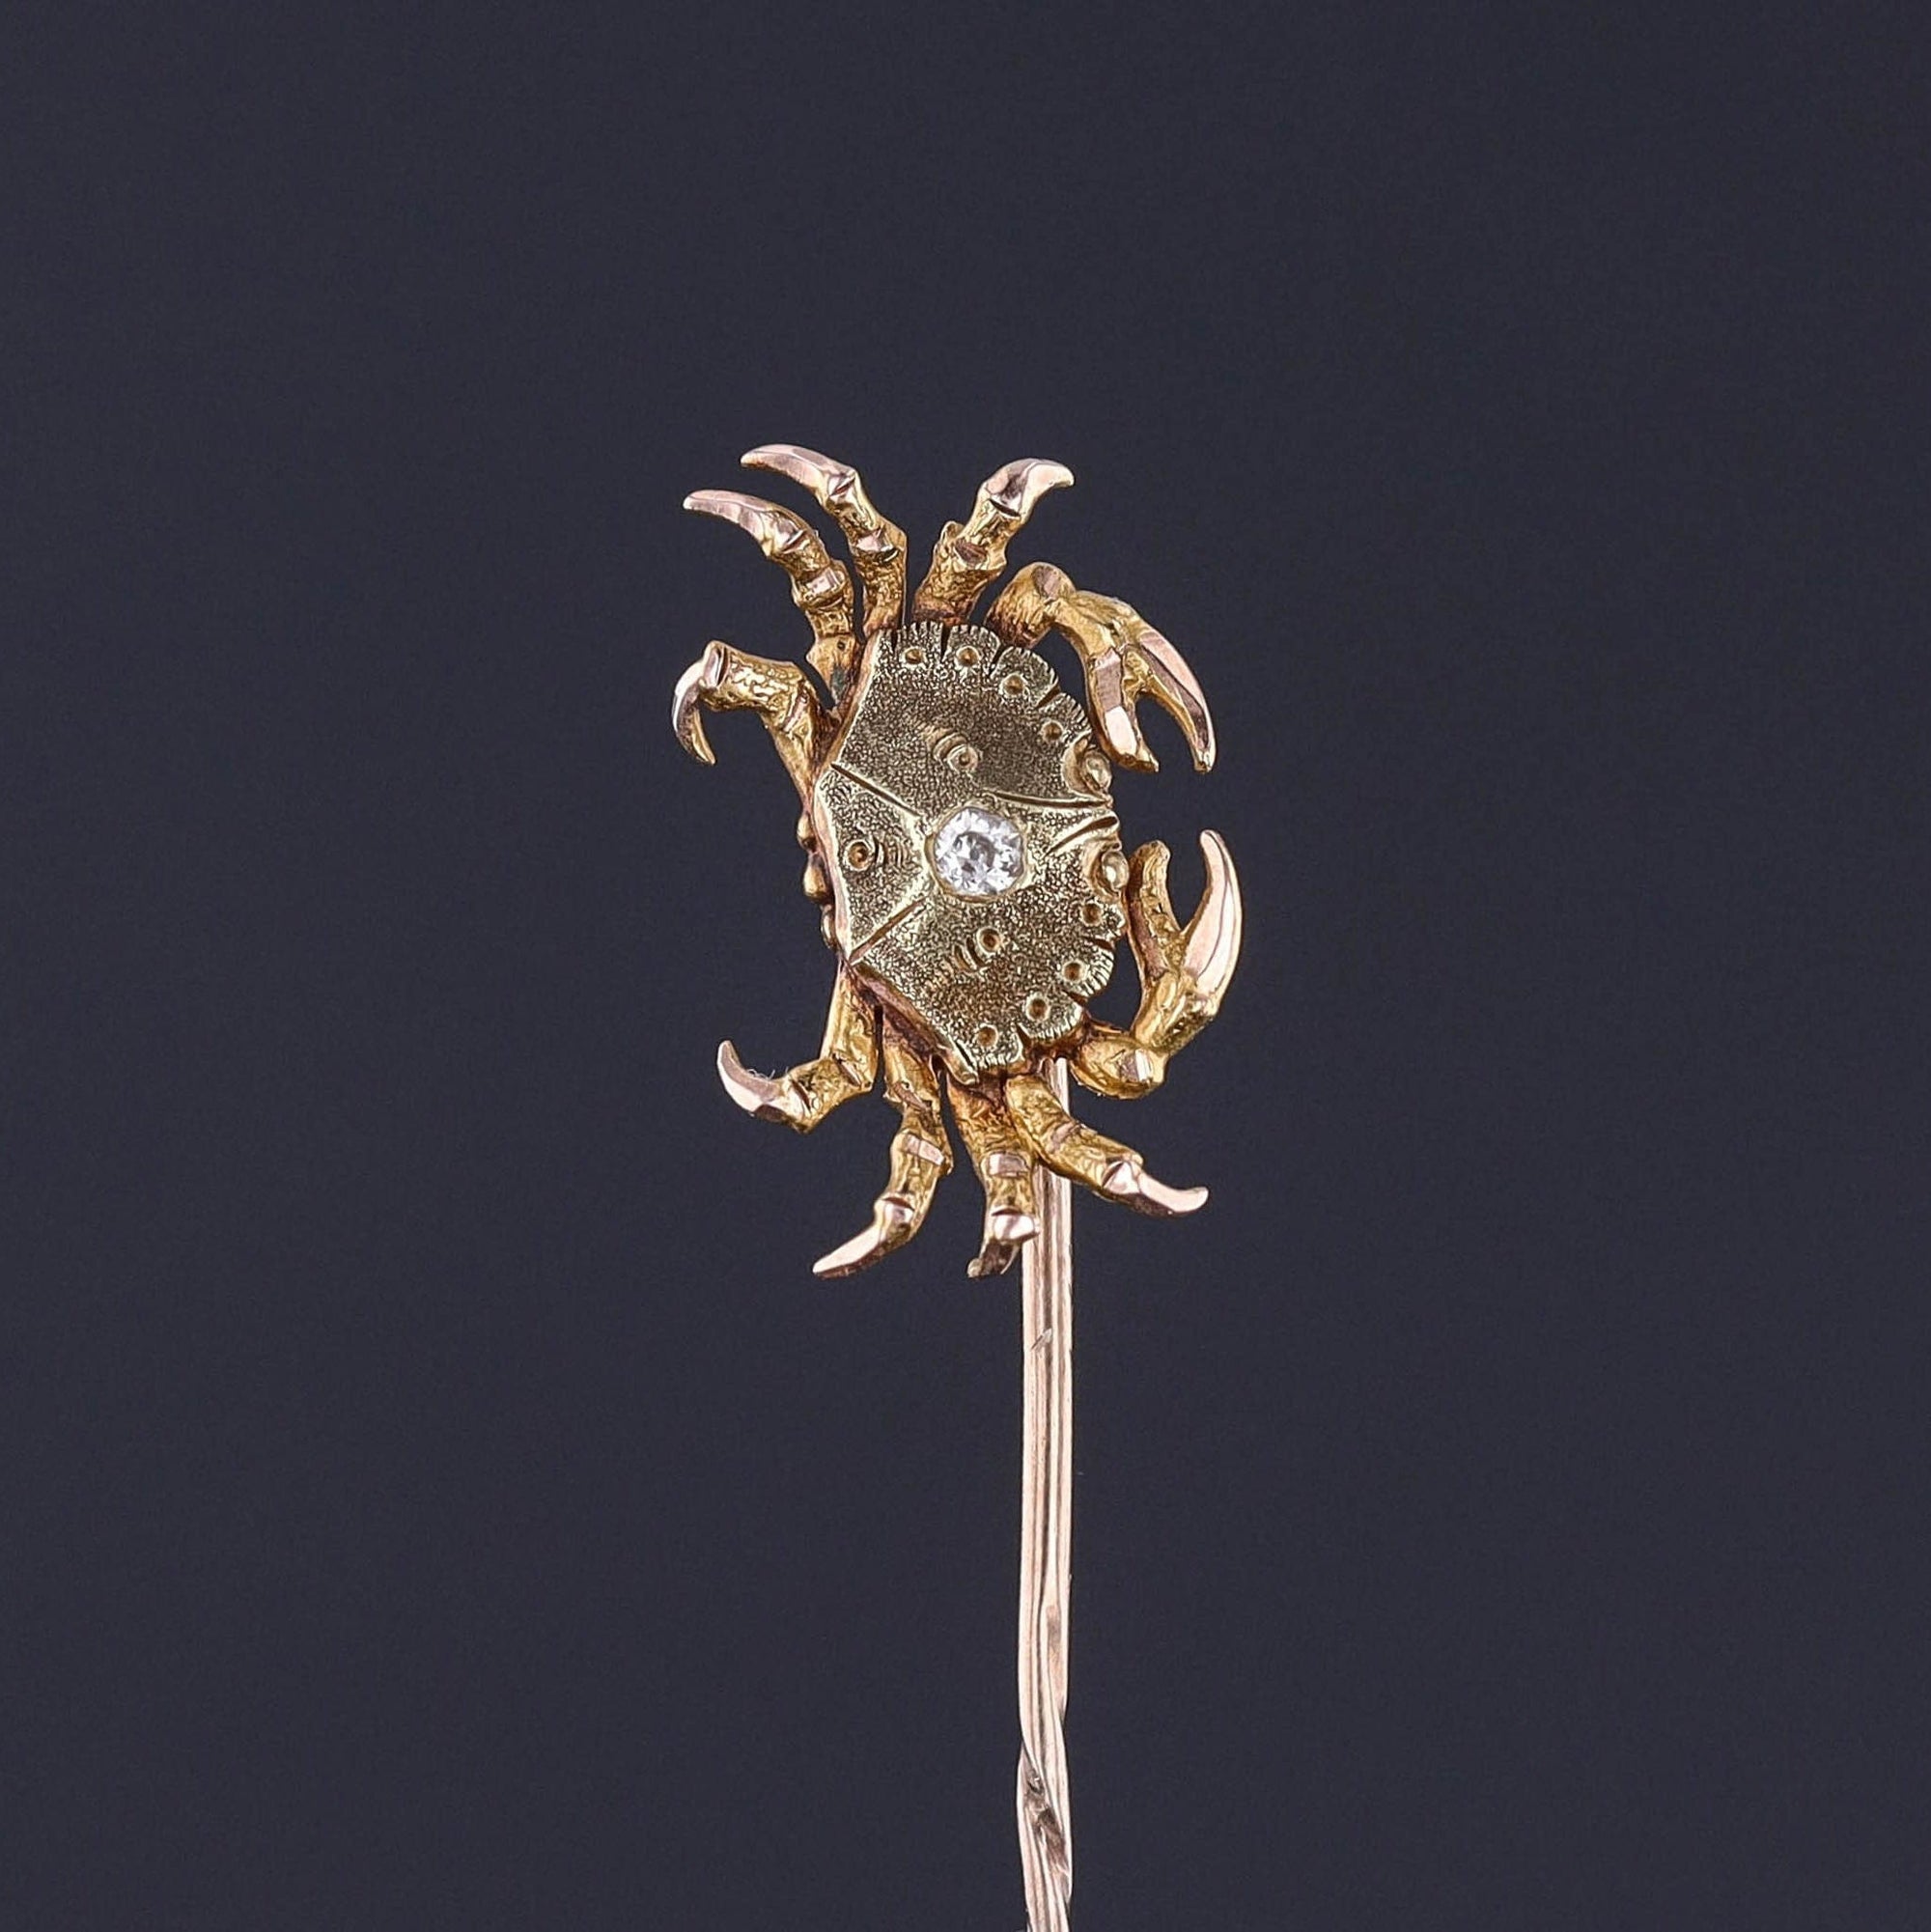 A 14k gold crab stickpin with a diamond accent. Perfect for any man or woman or collector of antique jewelry. The antique pin dates to the early 1900s and is in excellent condition.